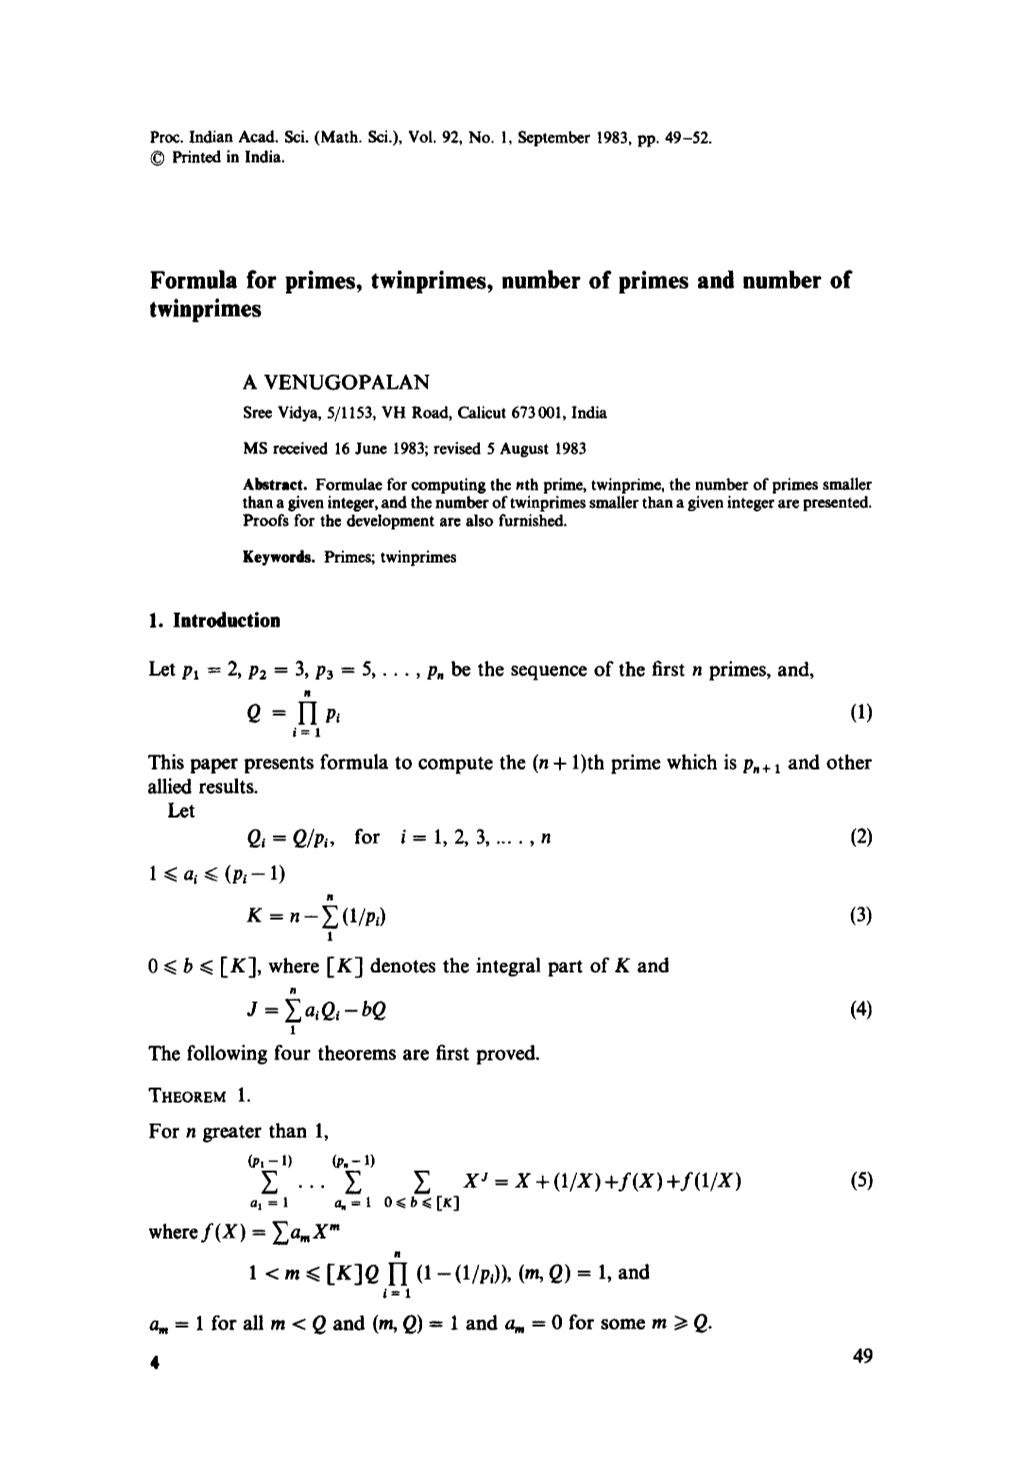 Formula for Primes, Twinprimes, Number of Primes and Number of Twinprimes